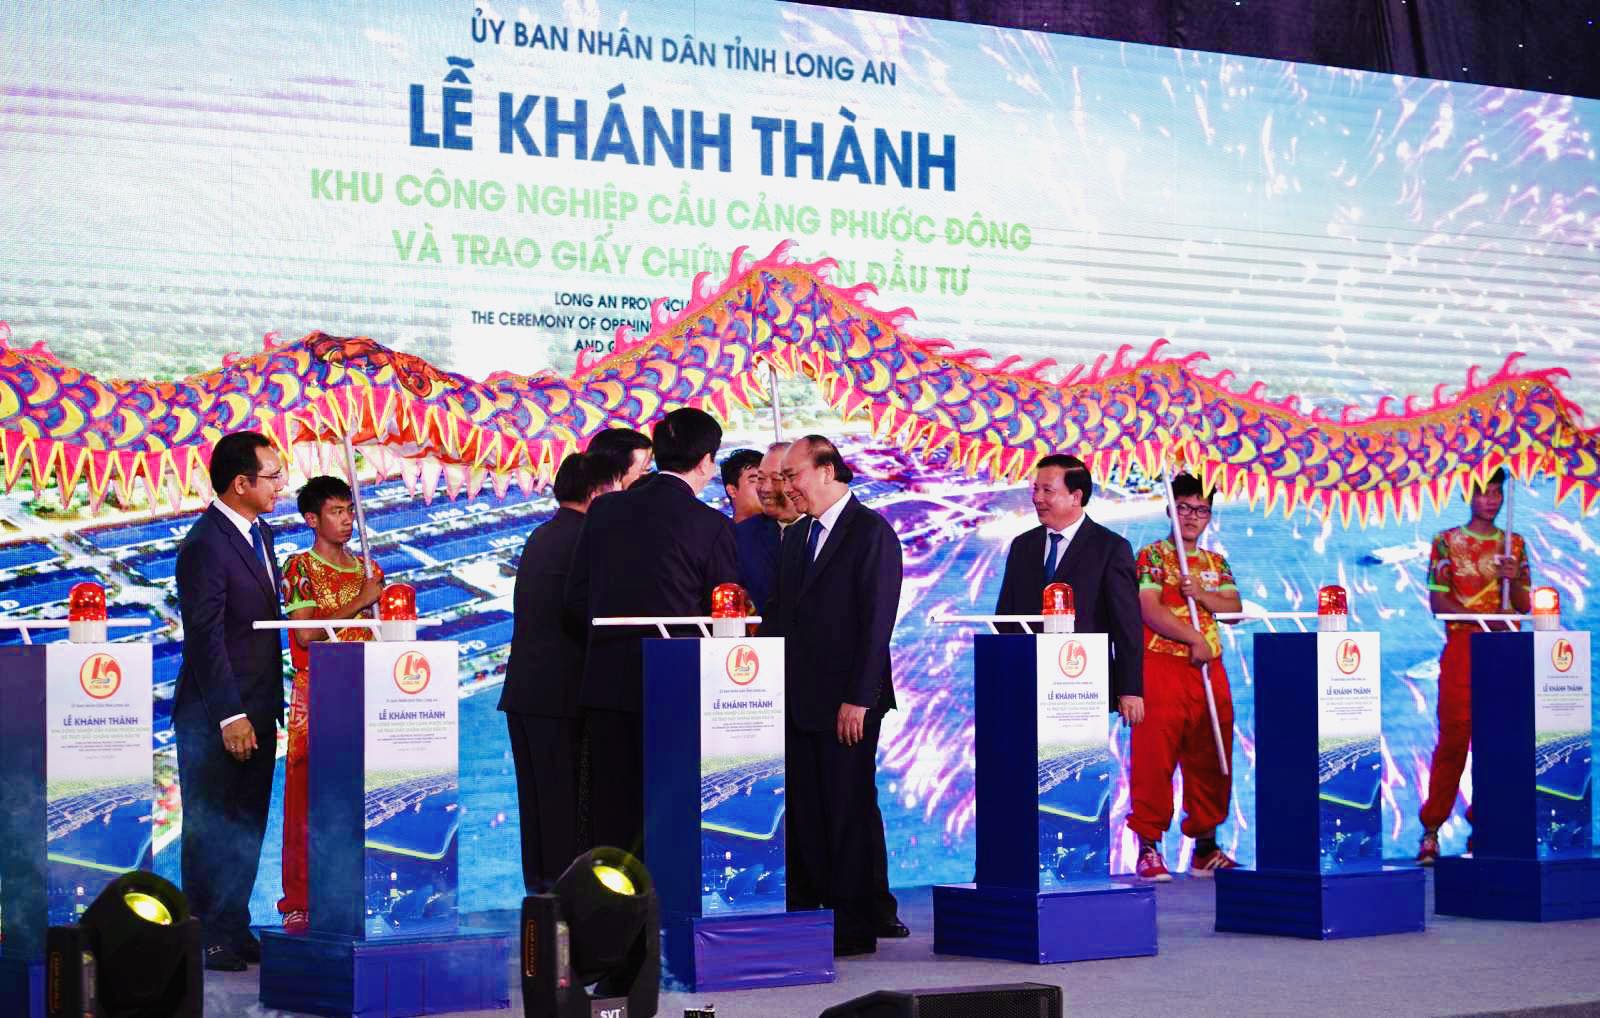 pm nguyen xuan phuc attends inaugural ceremony of phuoc dong industrial park and port